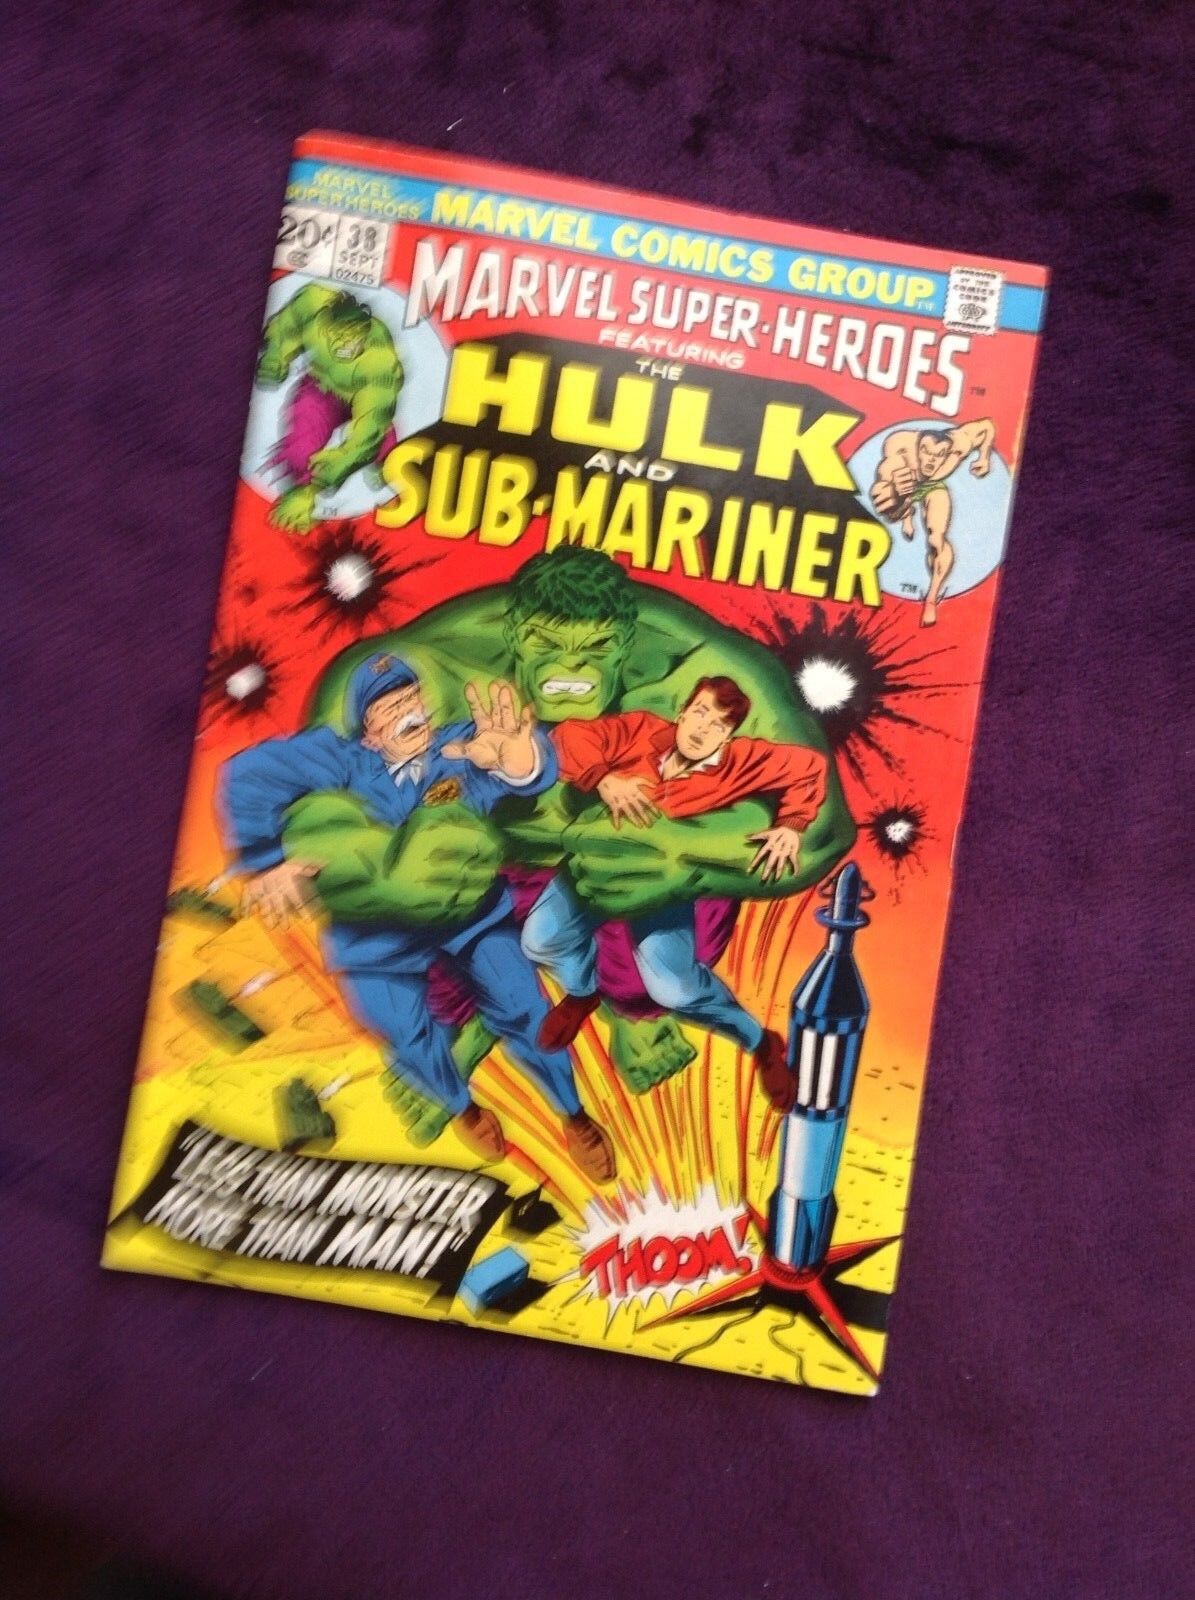 Marvel Super-Heroes featuring Hulk & Sub-Mariner #38 excellent  condition. S &B 